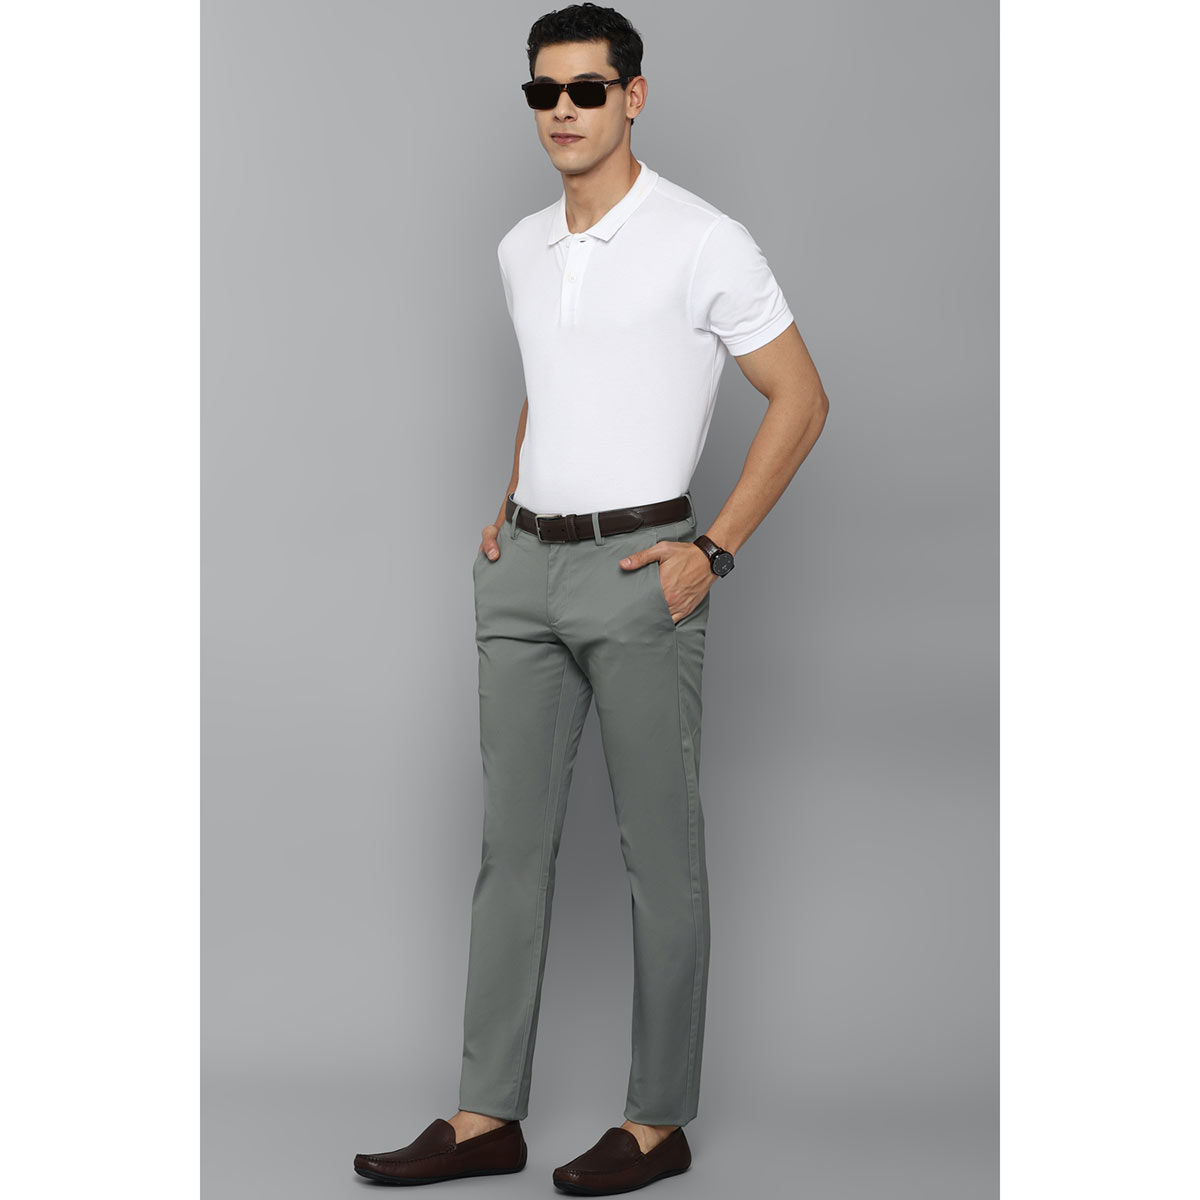 Allen Solly Cream Formal Trousers - Buy Allen Solly Cream Formal Trousers  Online at Best Prices in India on Snapdeal